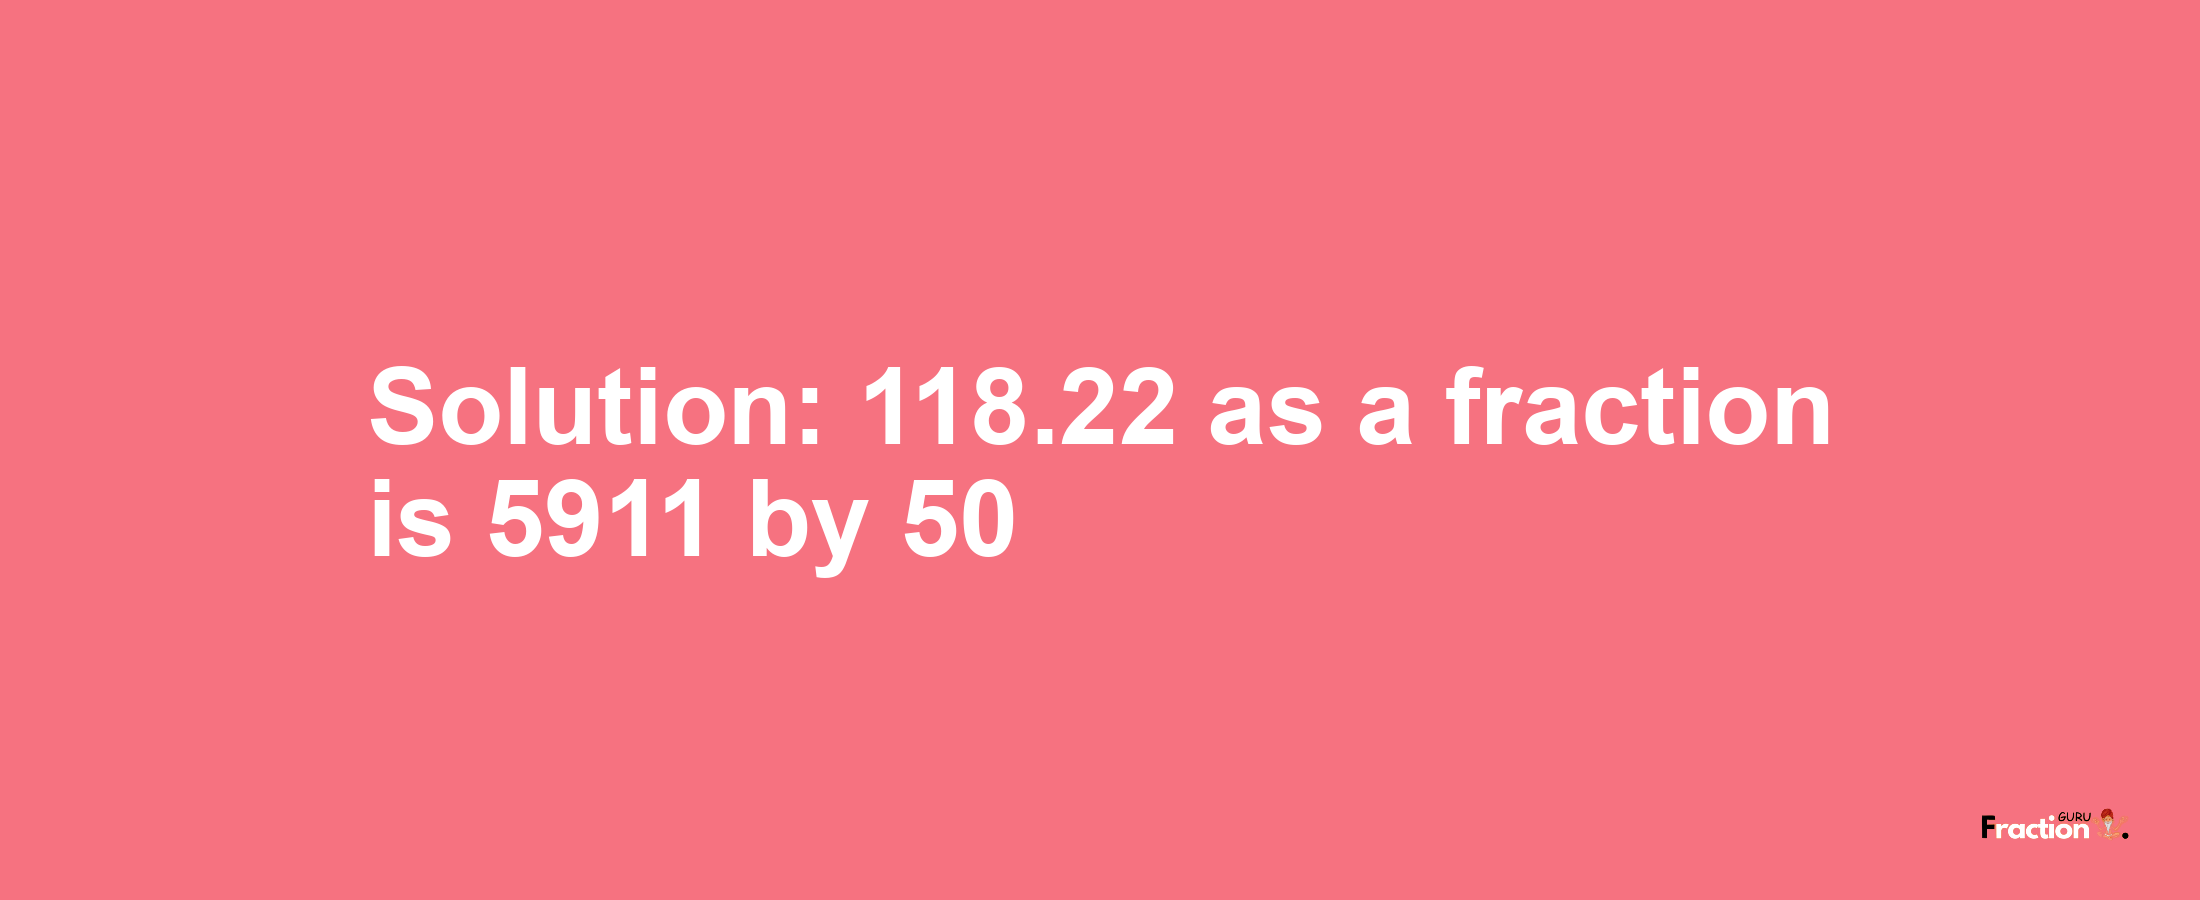 Solution:118.22 as a fraction is 5911/50